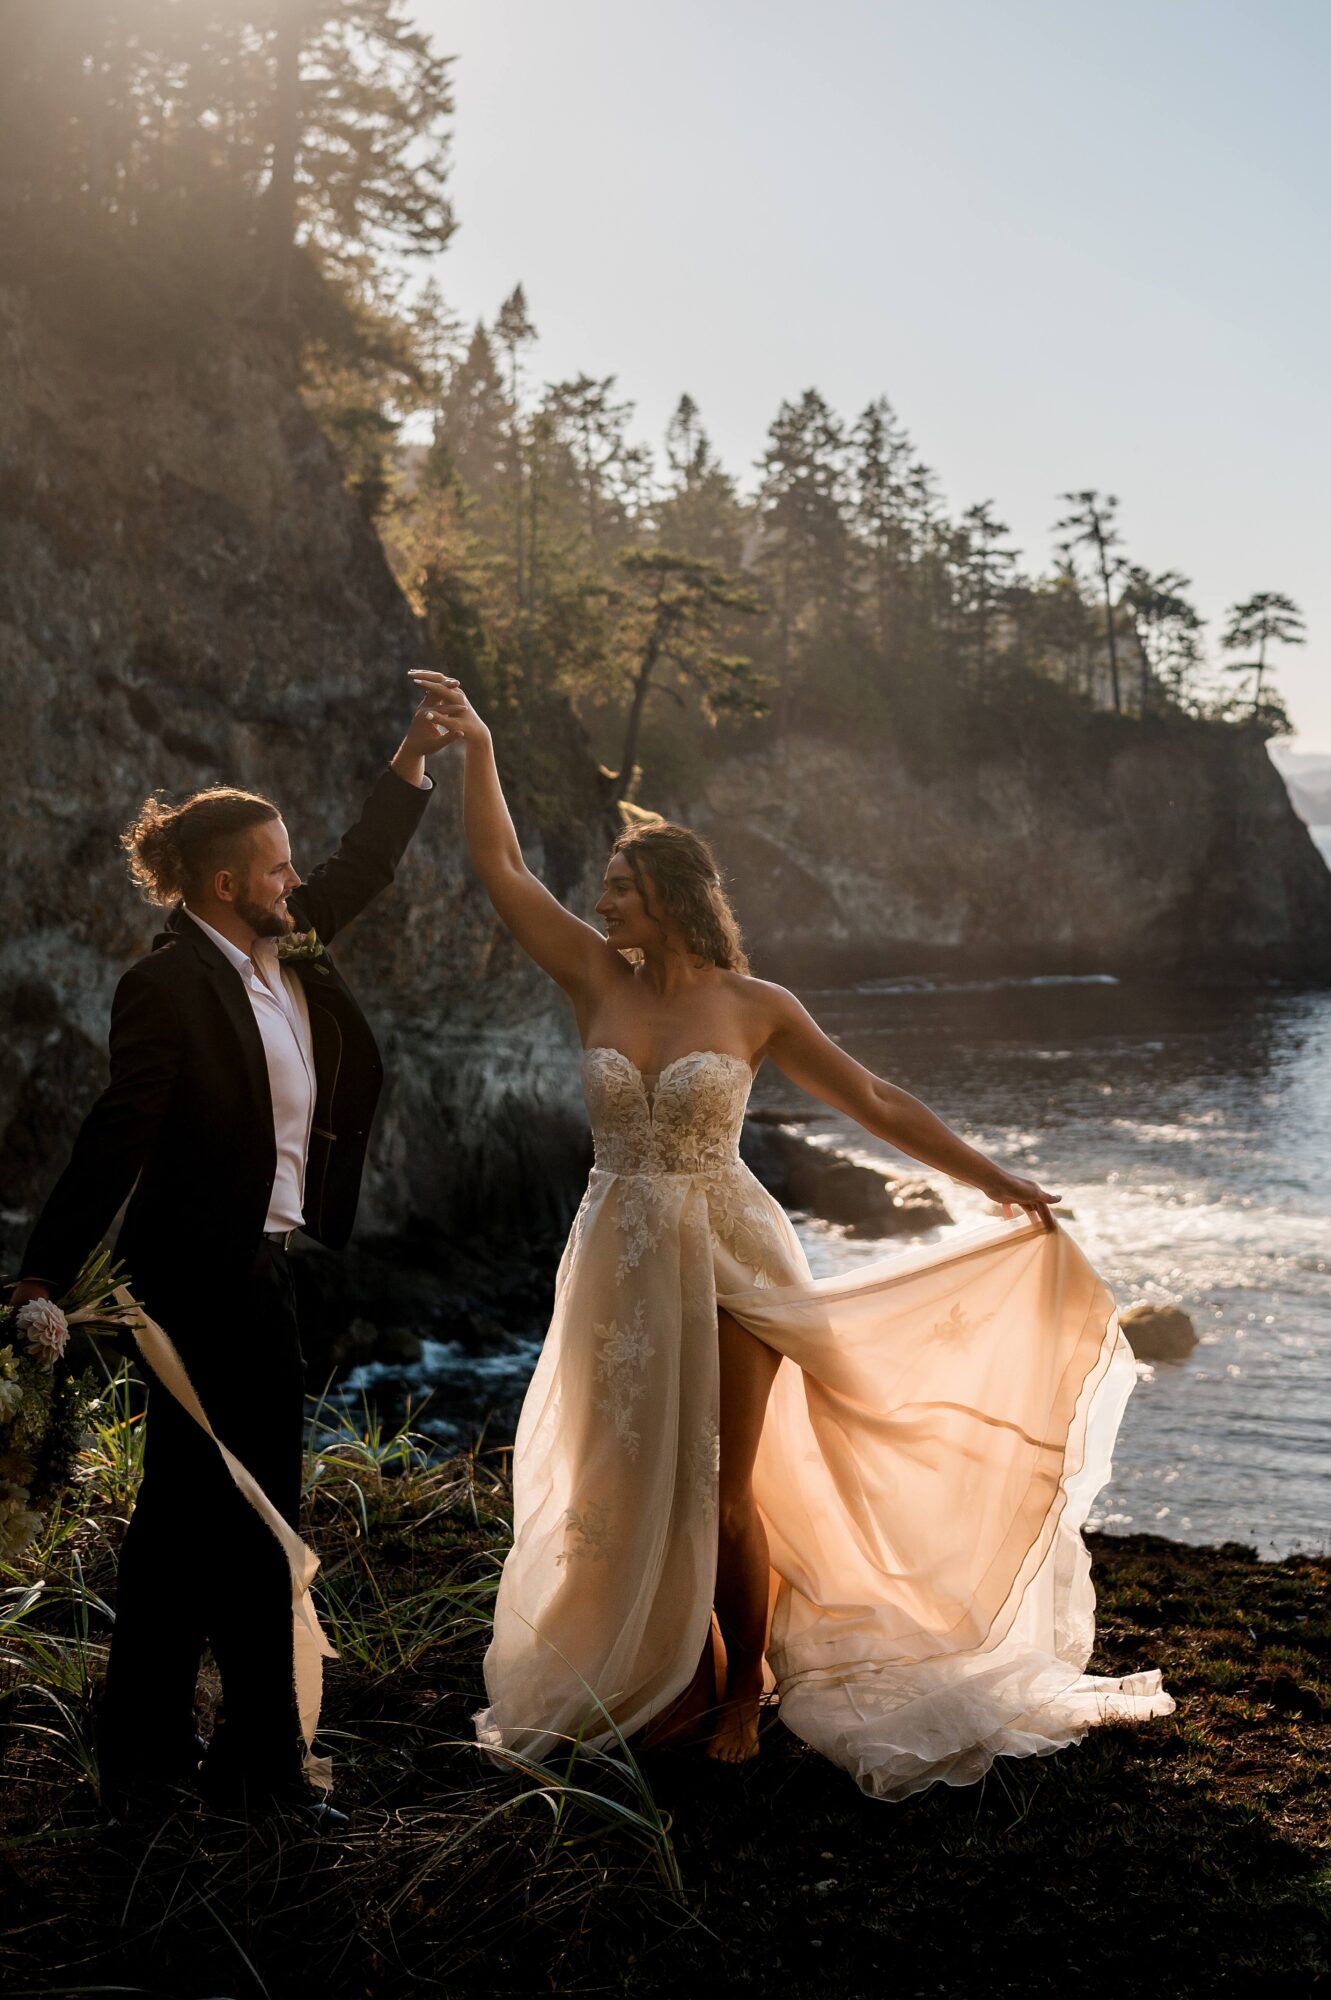 Bride and groom dancing at sunset on the coast of Washington State